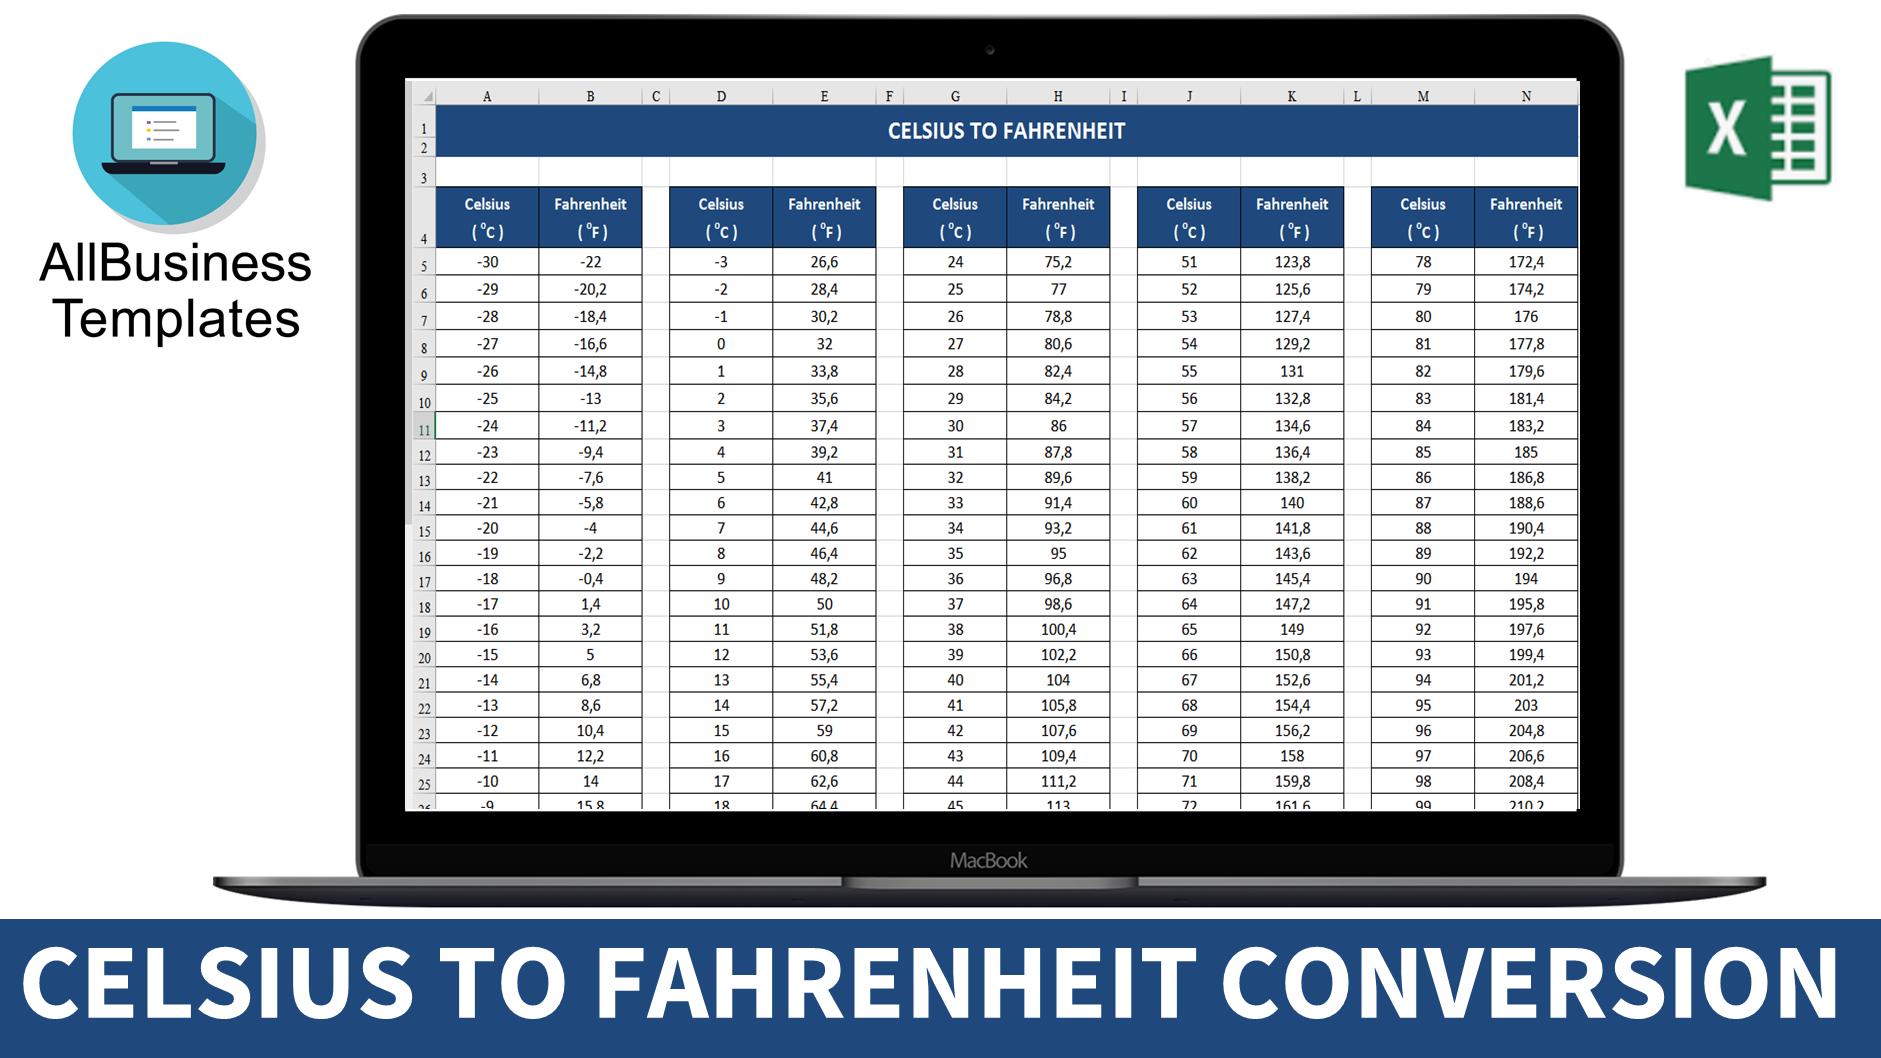 Celsius to Fahrenheit conversion chart | Templates at